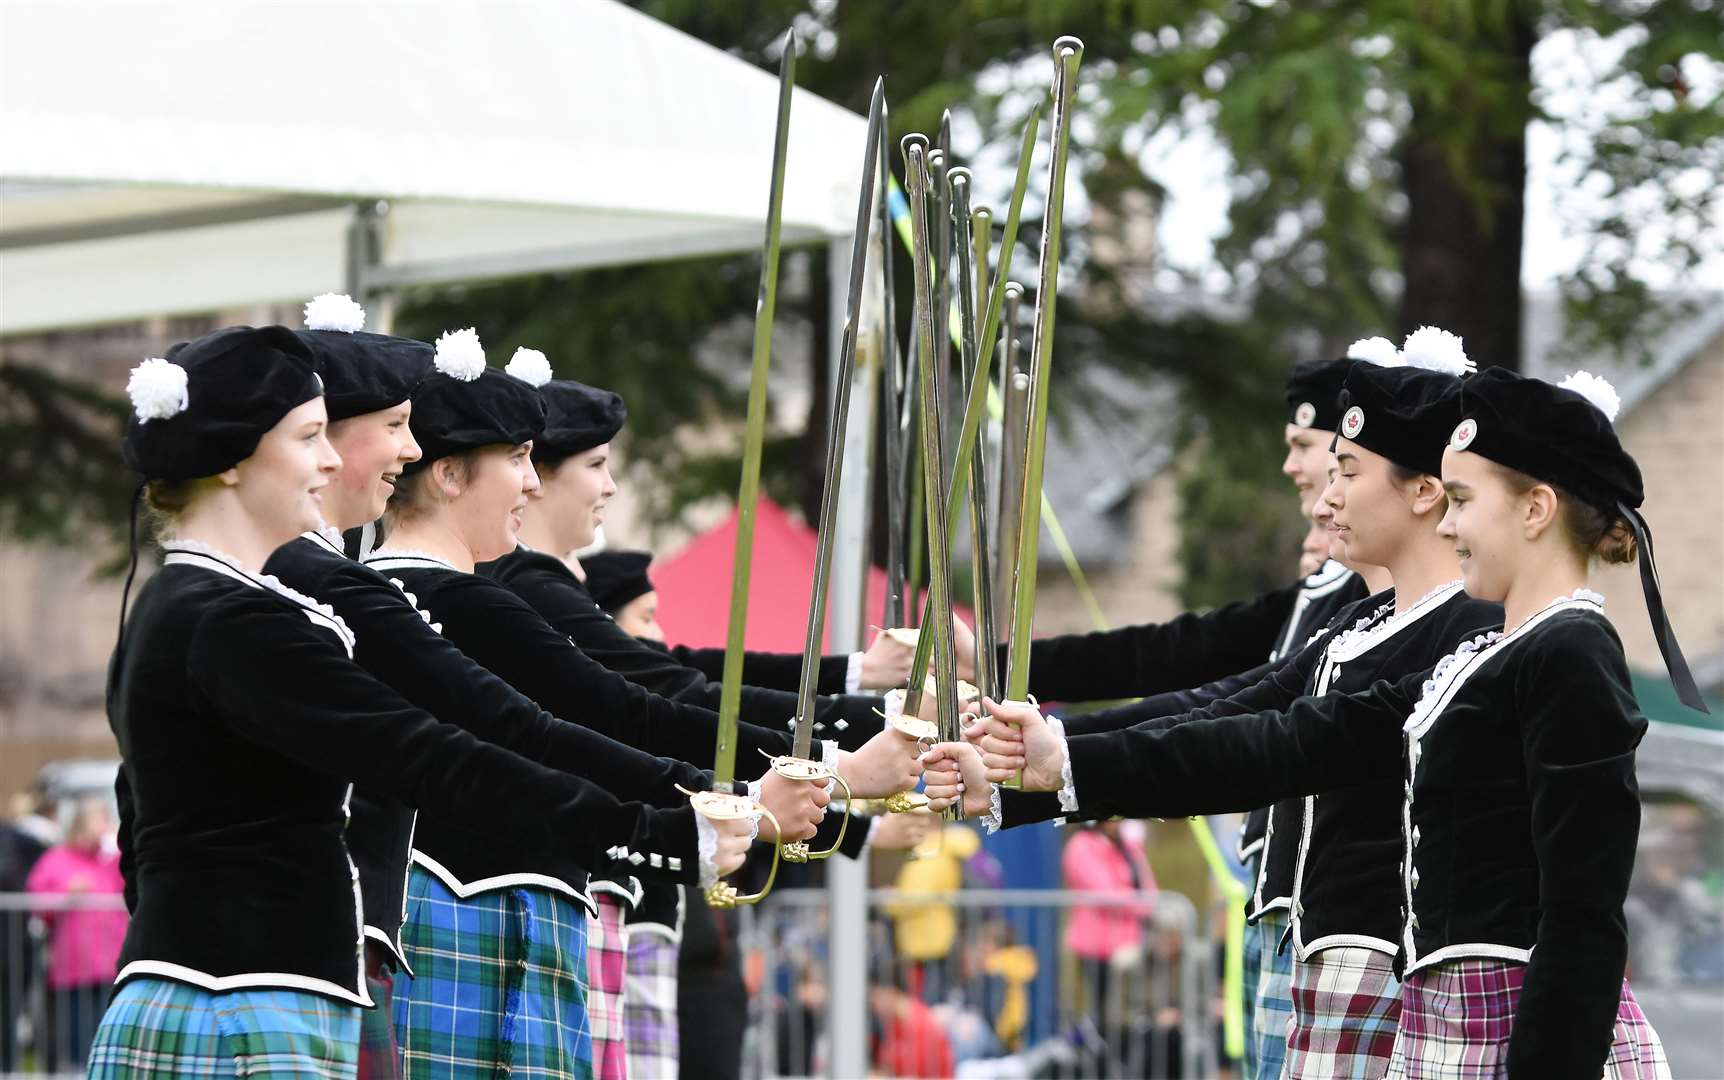 The Dunvegan Dance Academy in Vancouver, Canada at the 2019 Forres Highland <a class=